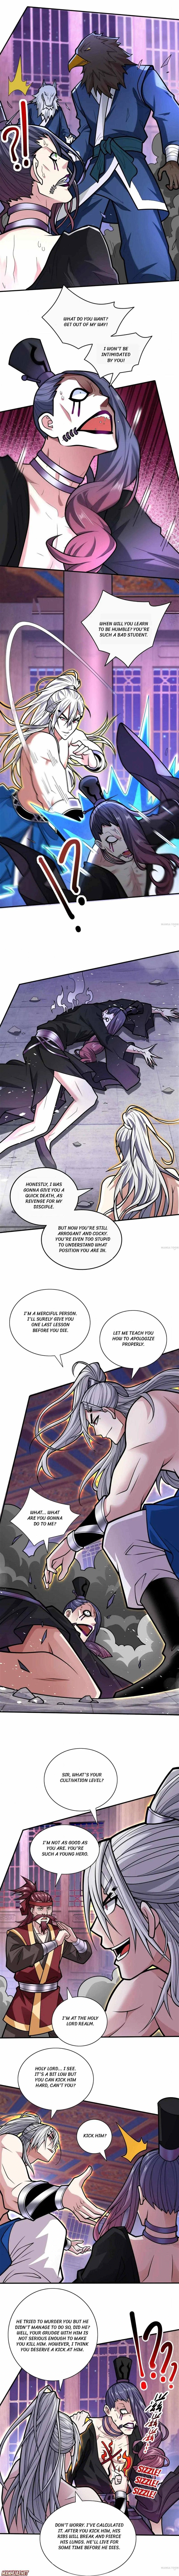 99 Ways to Become Heroes by Beauty Masters Chapter 108 page 2